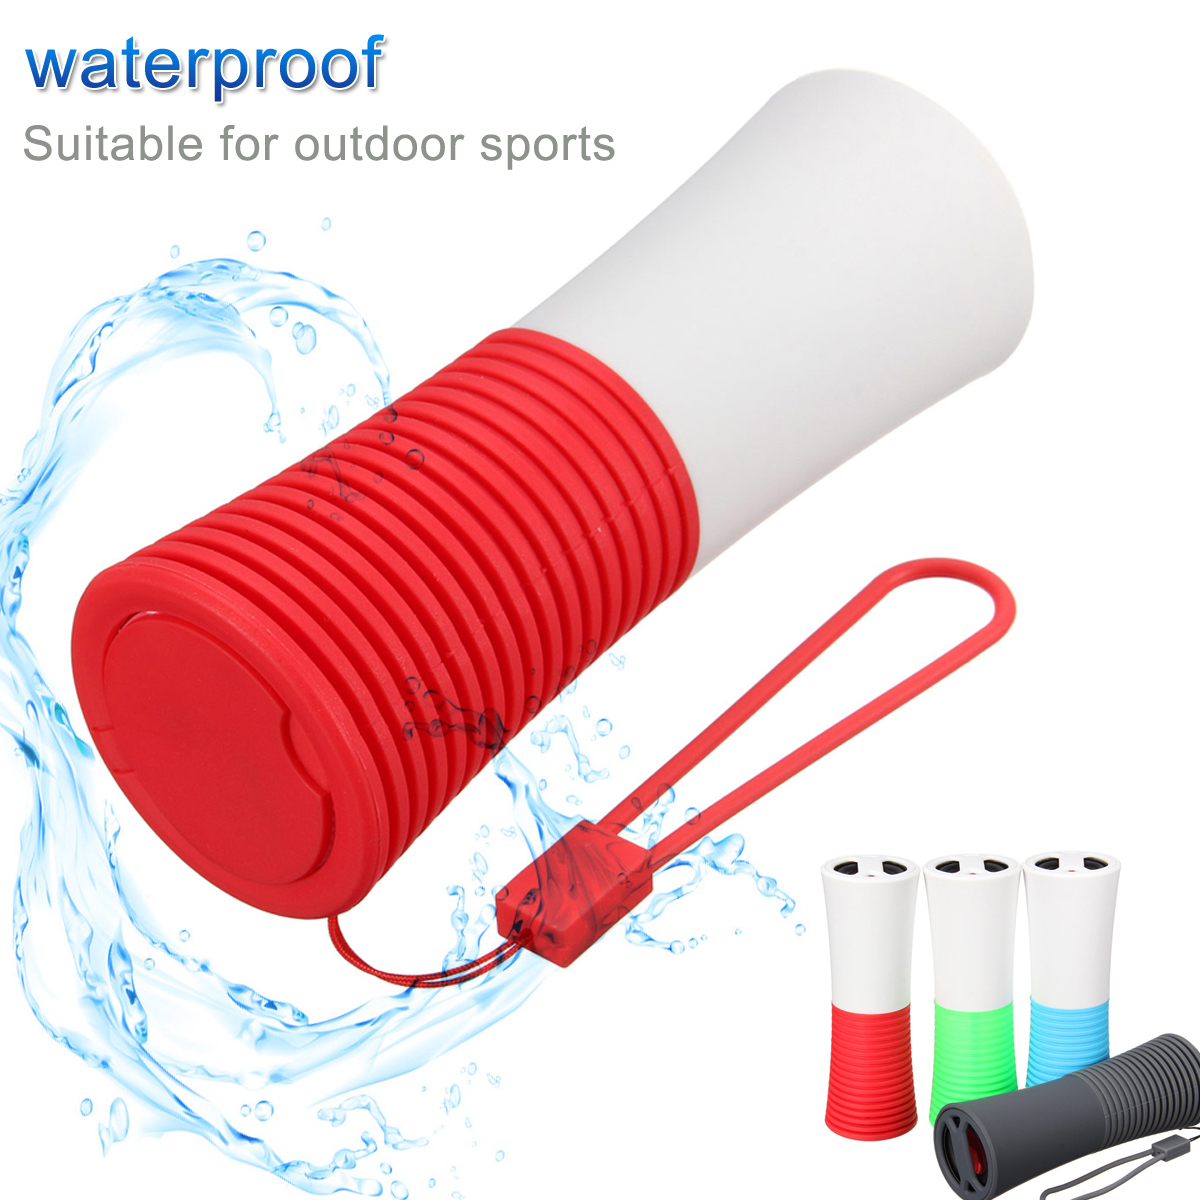 Universal-Waterproof-bluetooth-Portable-Speaker-4000mAh-Power-Bank-Outdoor-Sport-Applicable-for-Smar-999739-4